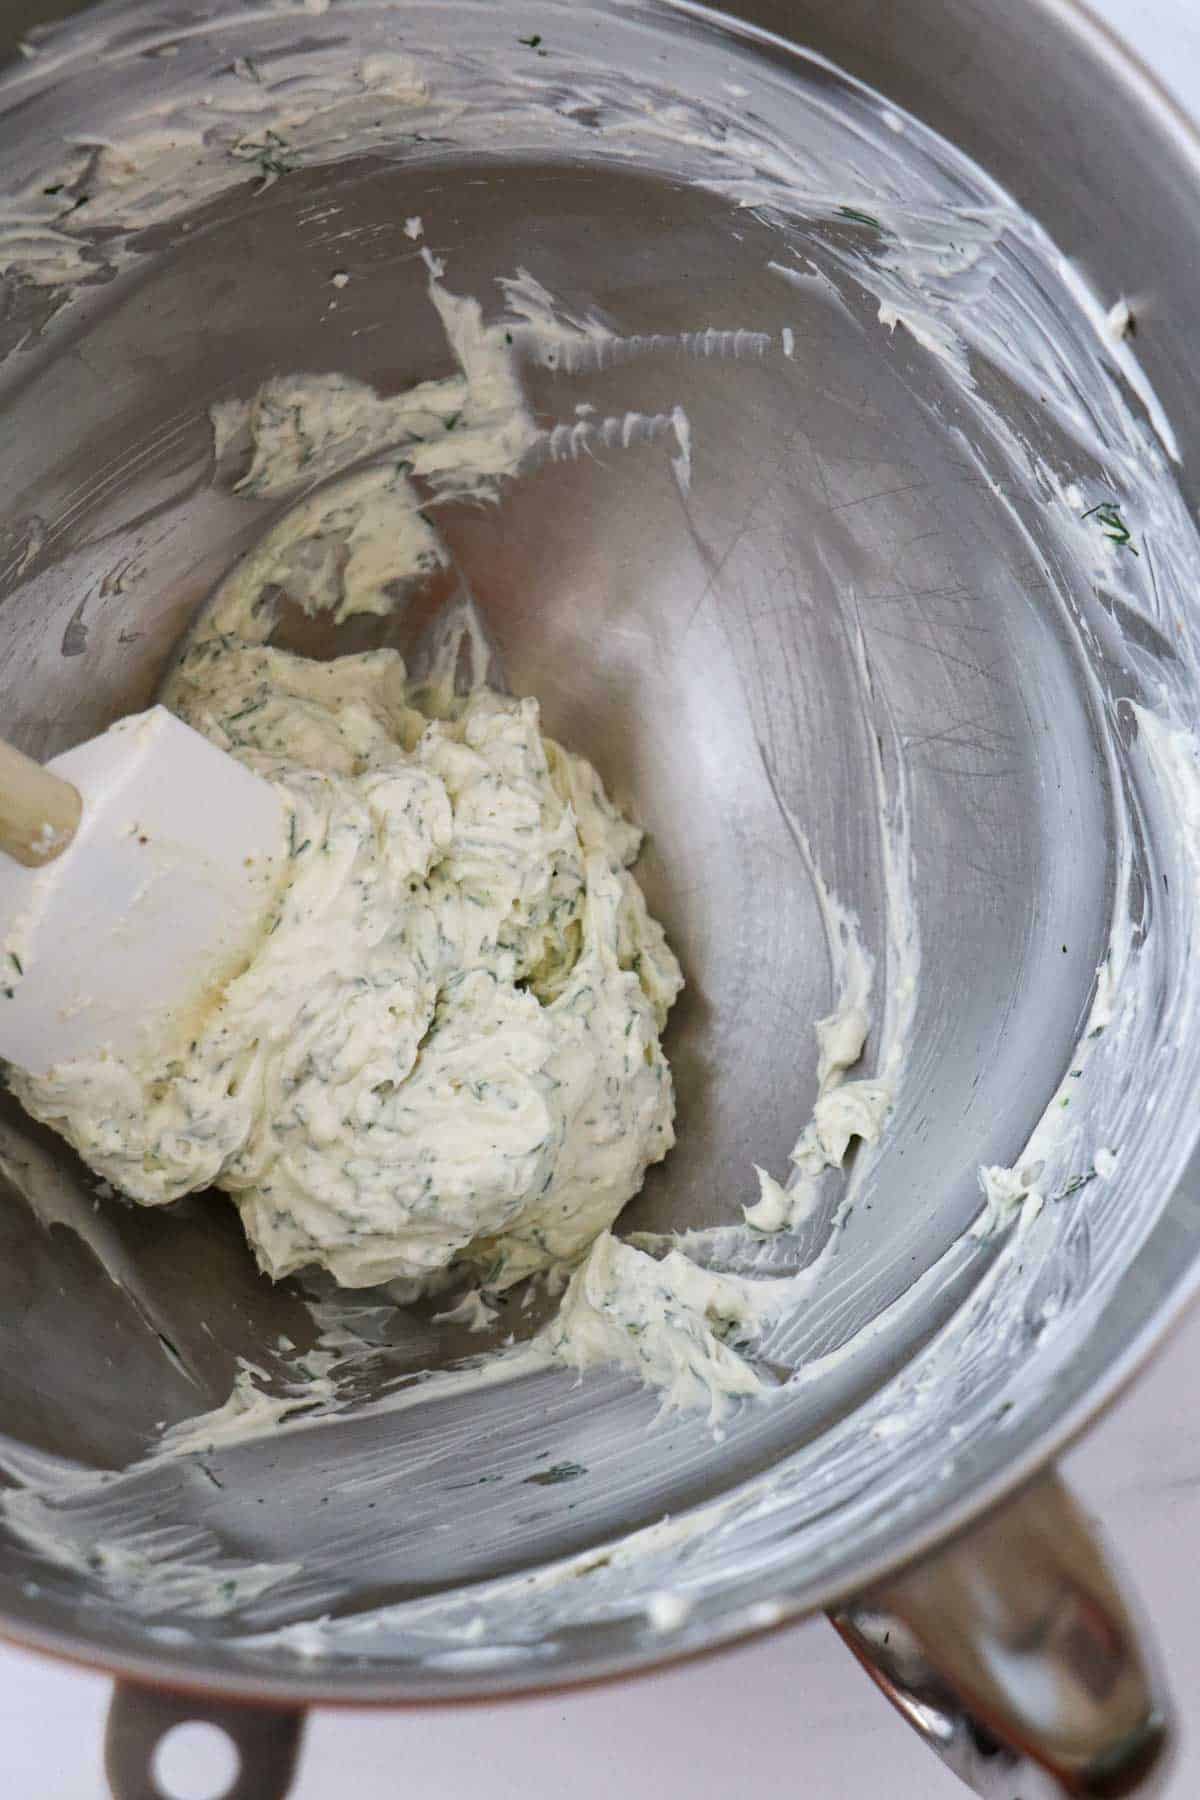 Cream cheese and dill mixture in a metal bowl with a rubber spatula.